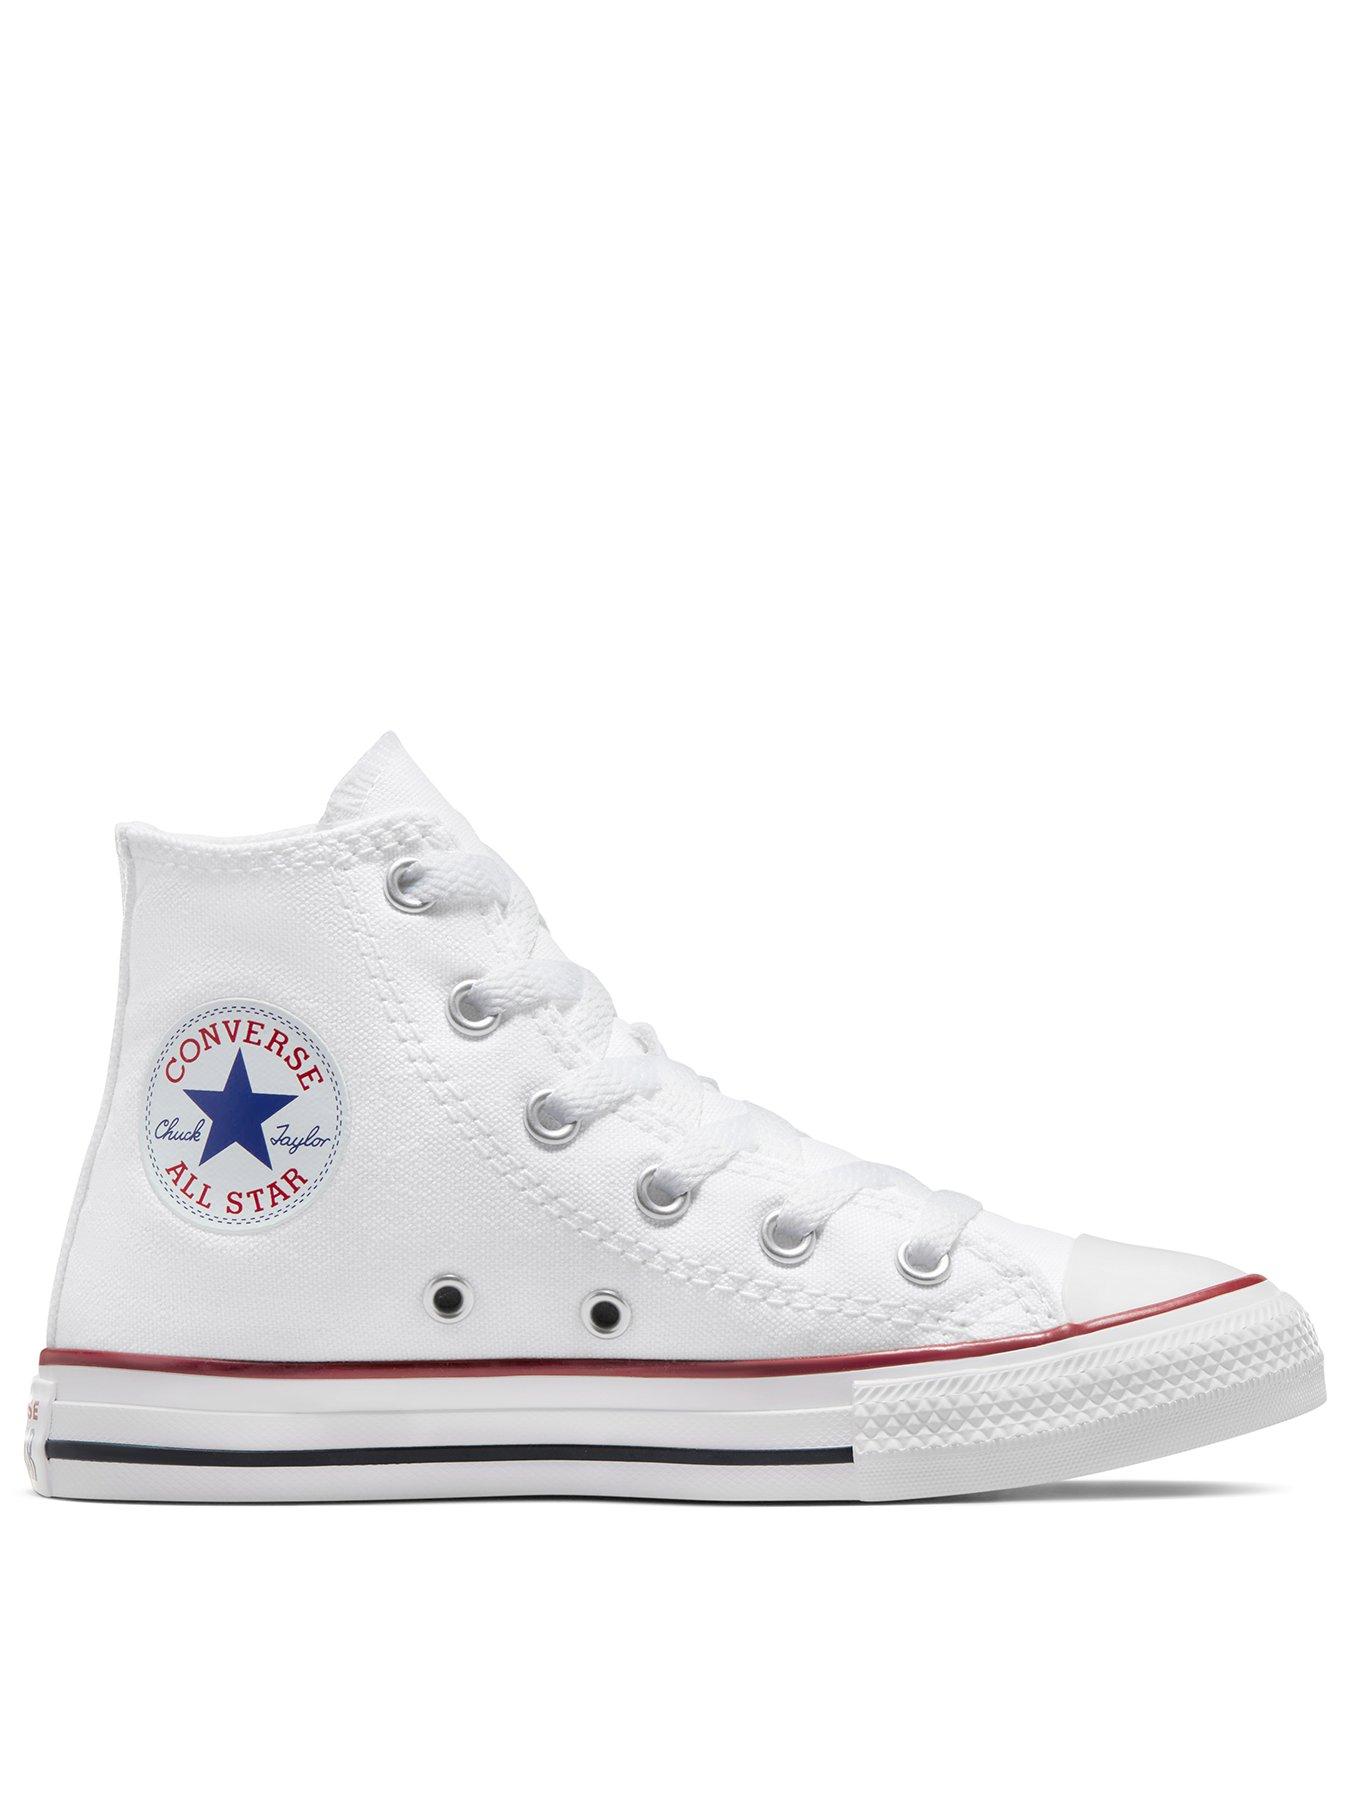 all white infant converse